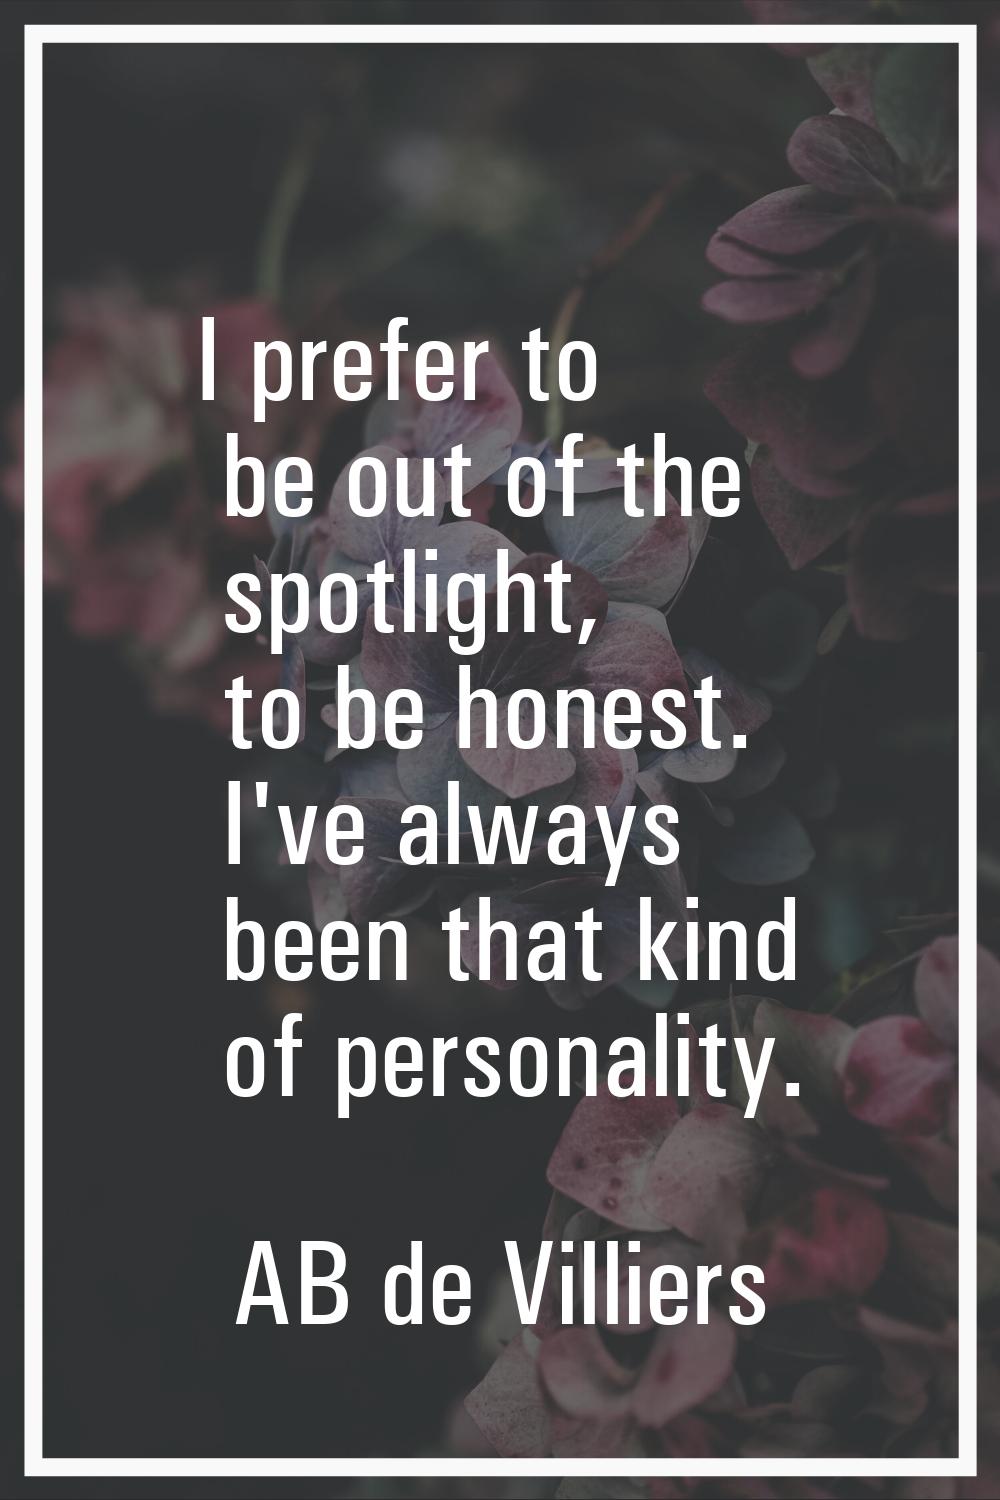 I prefer to be out of the spotlight, to be honest. I've always been that kind of personality.